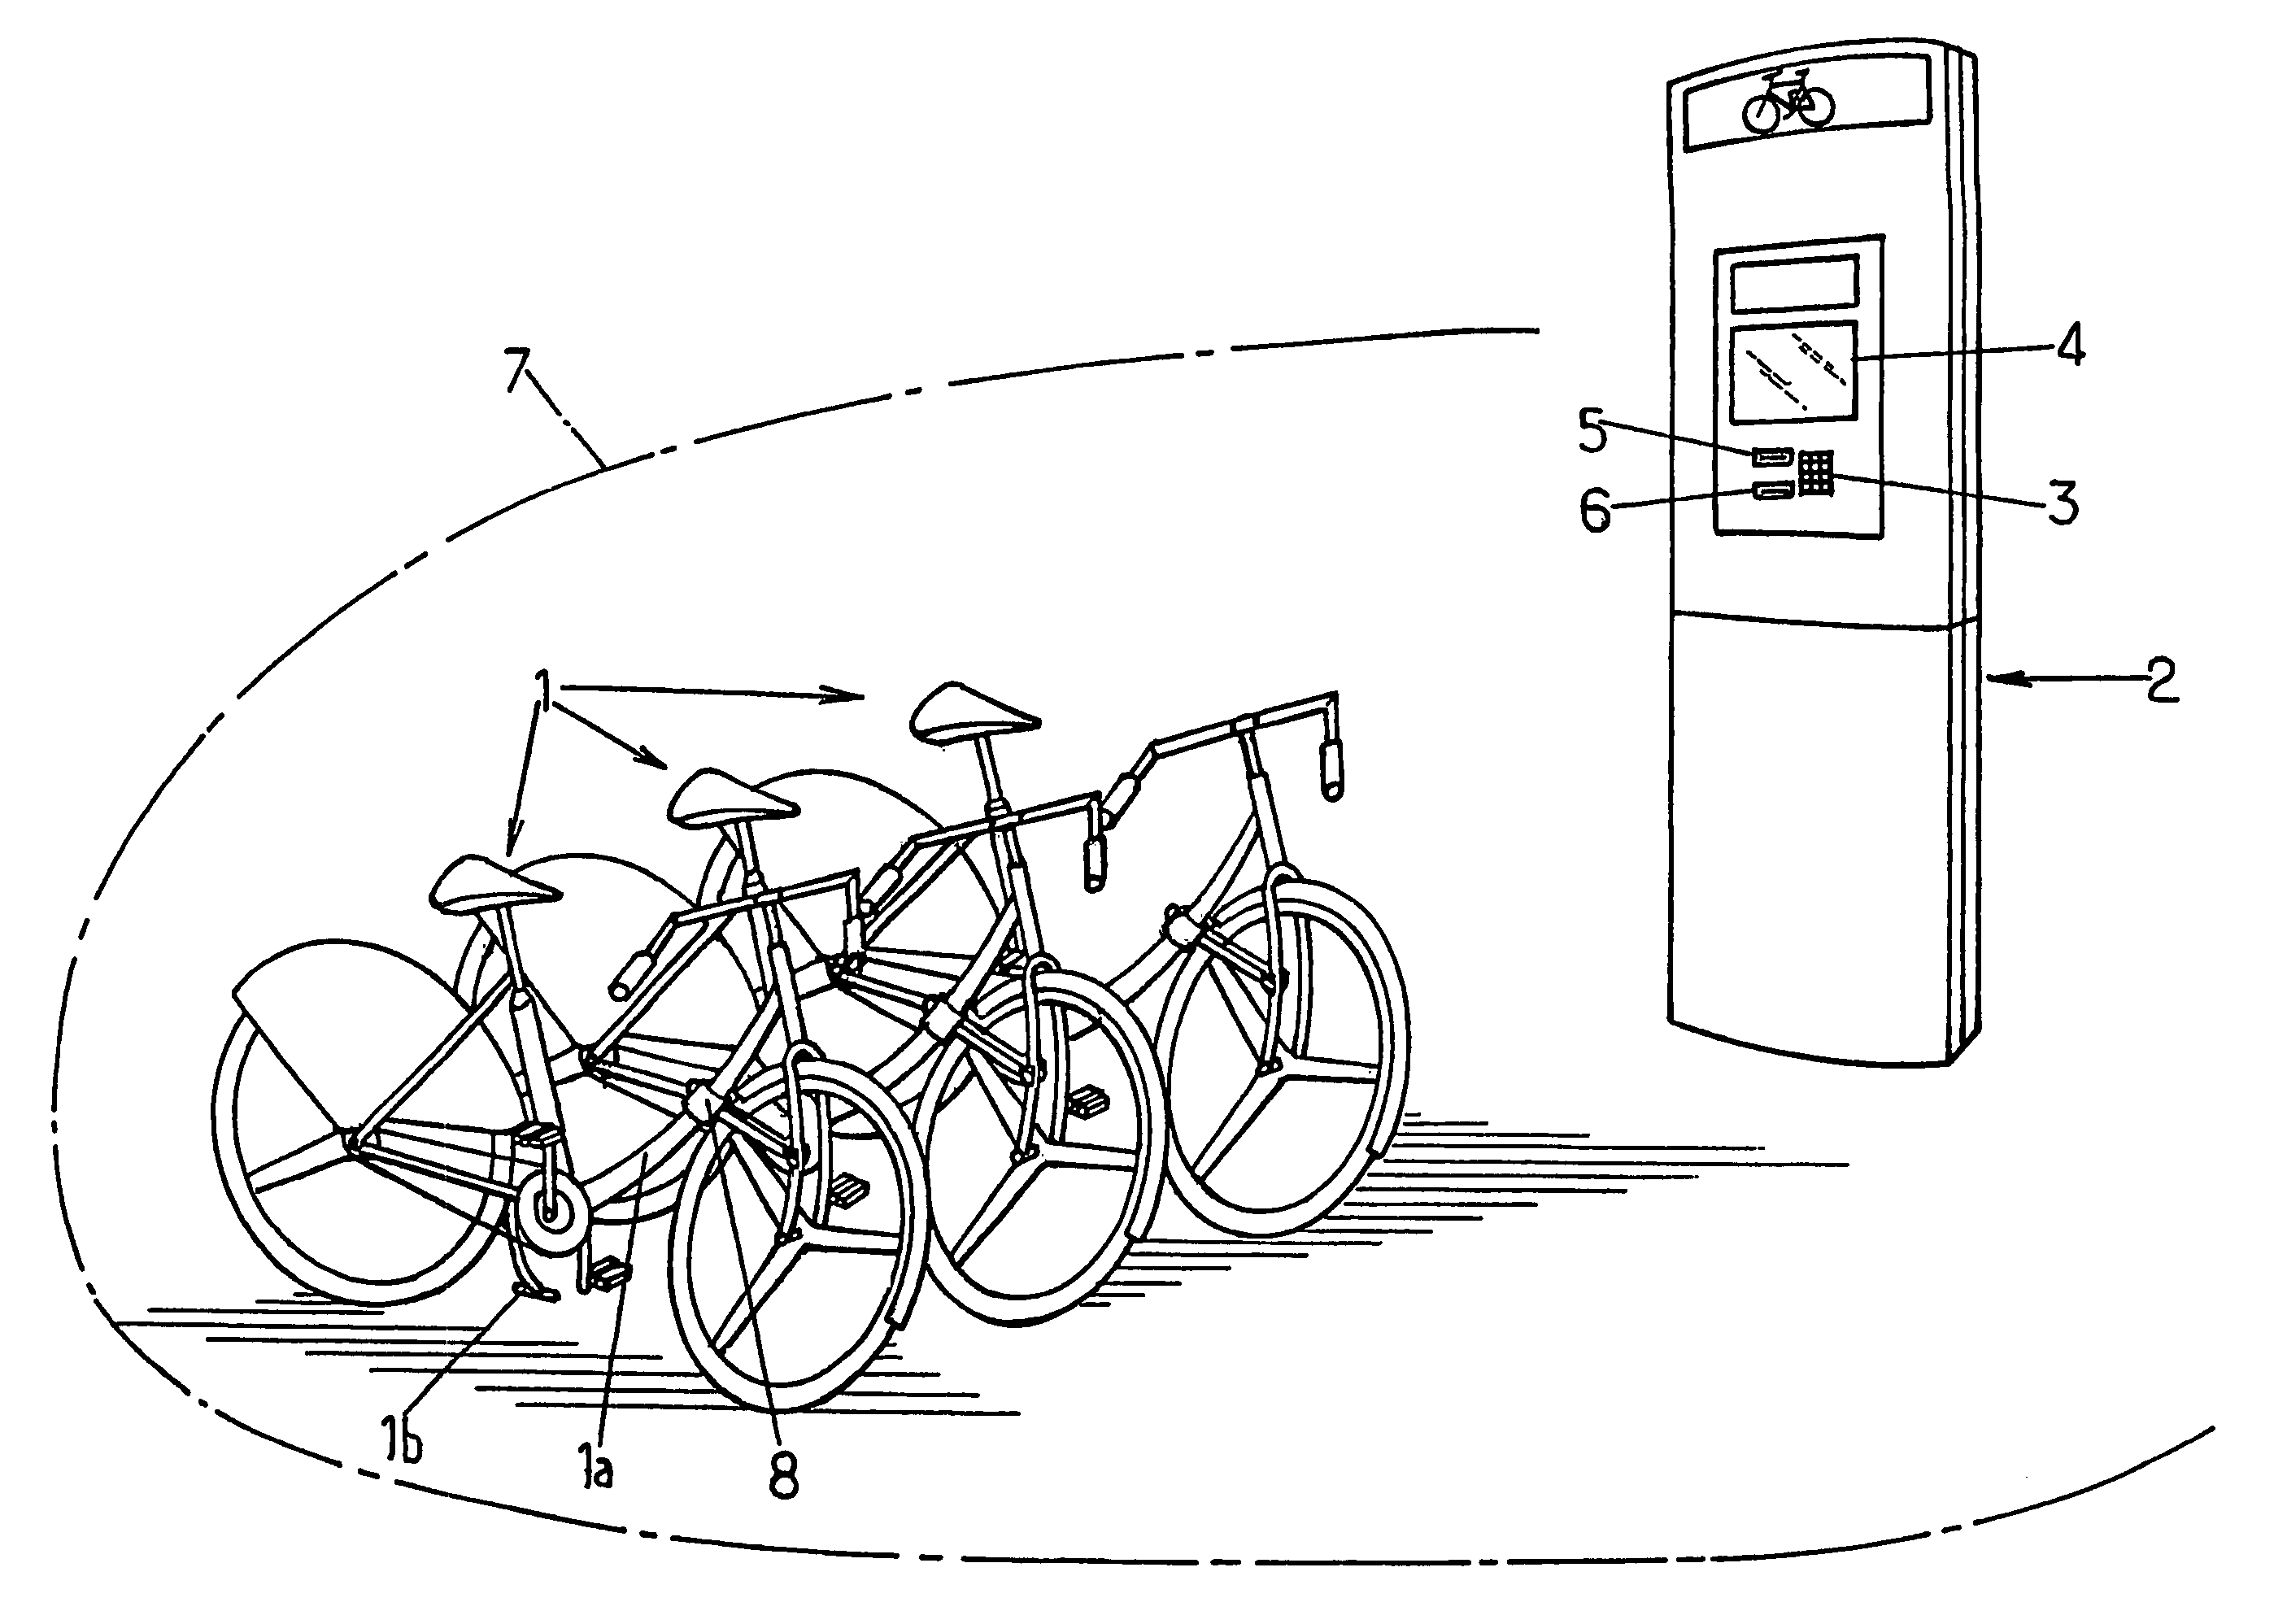 Automatic cycle storage system